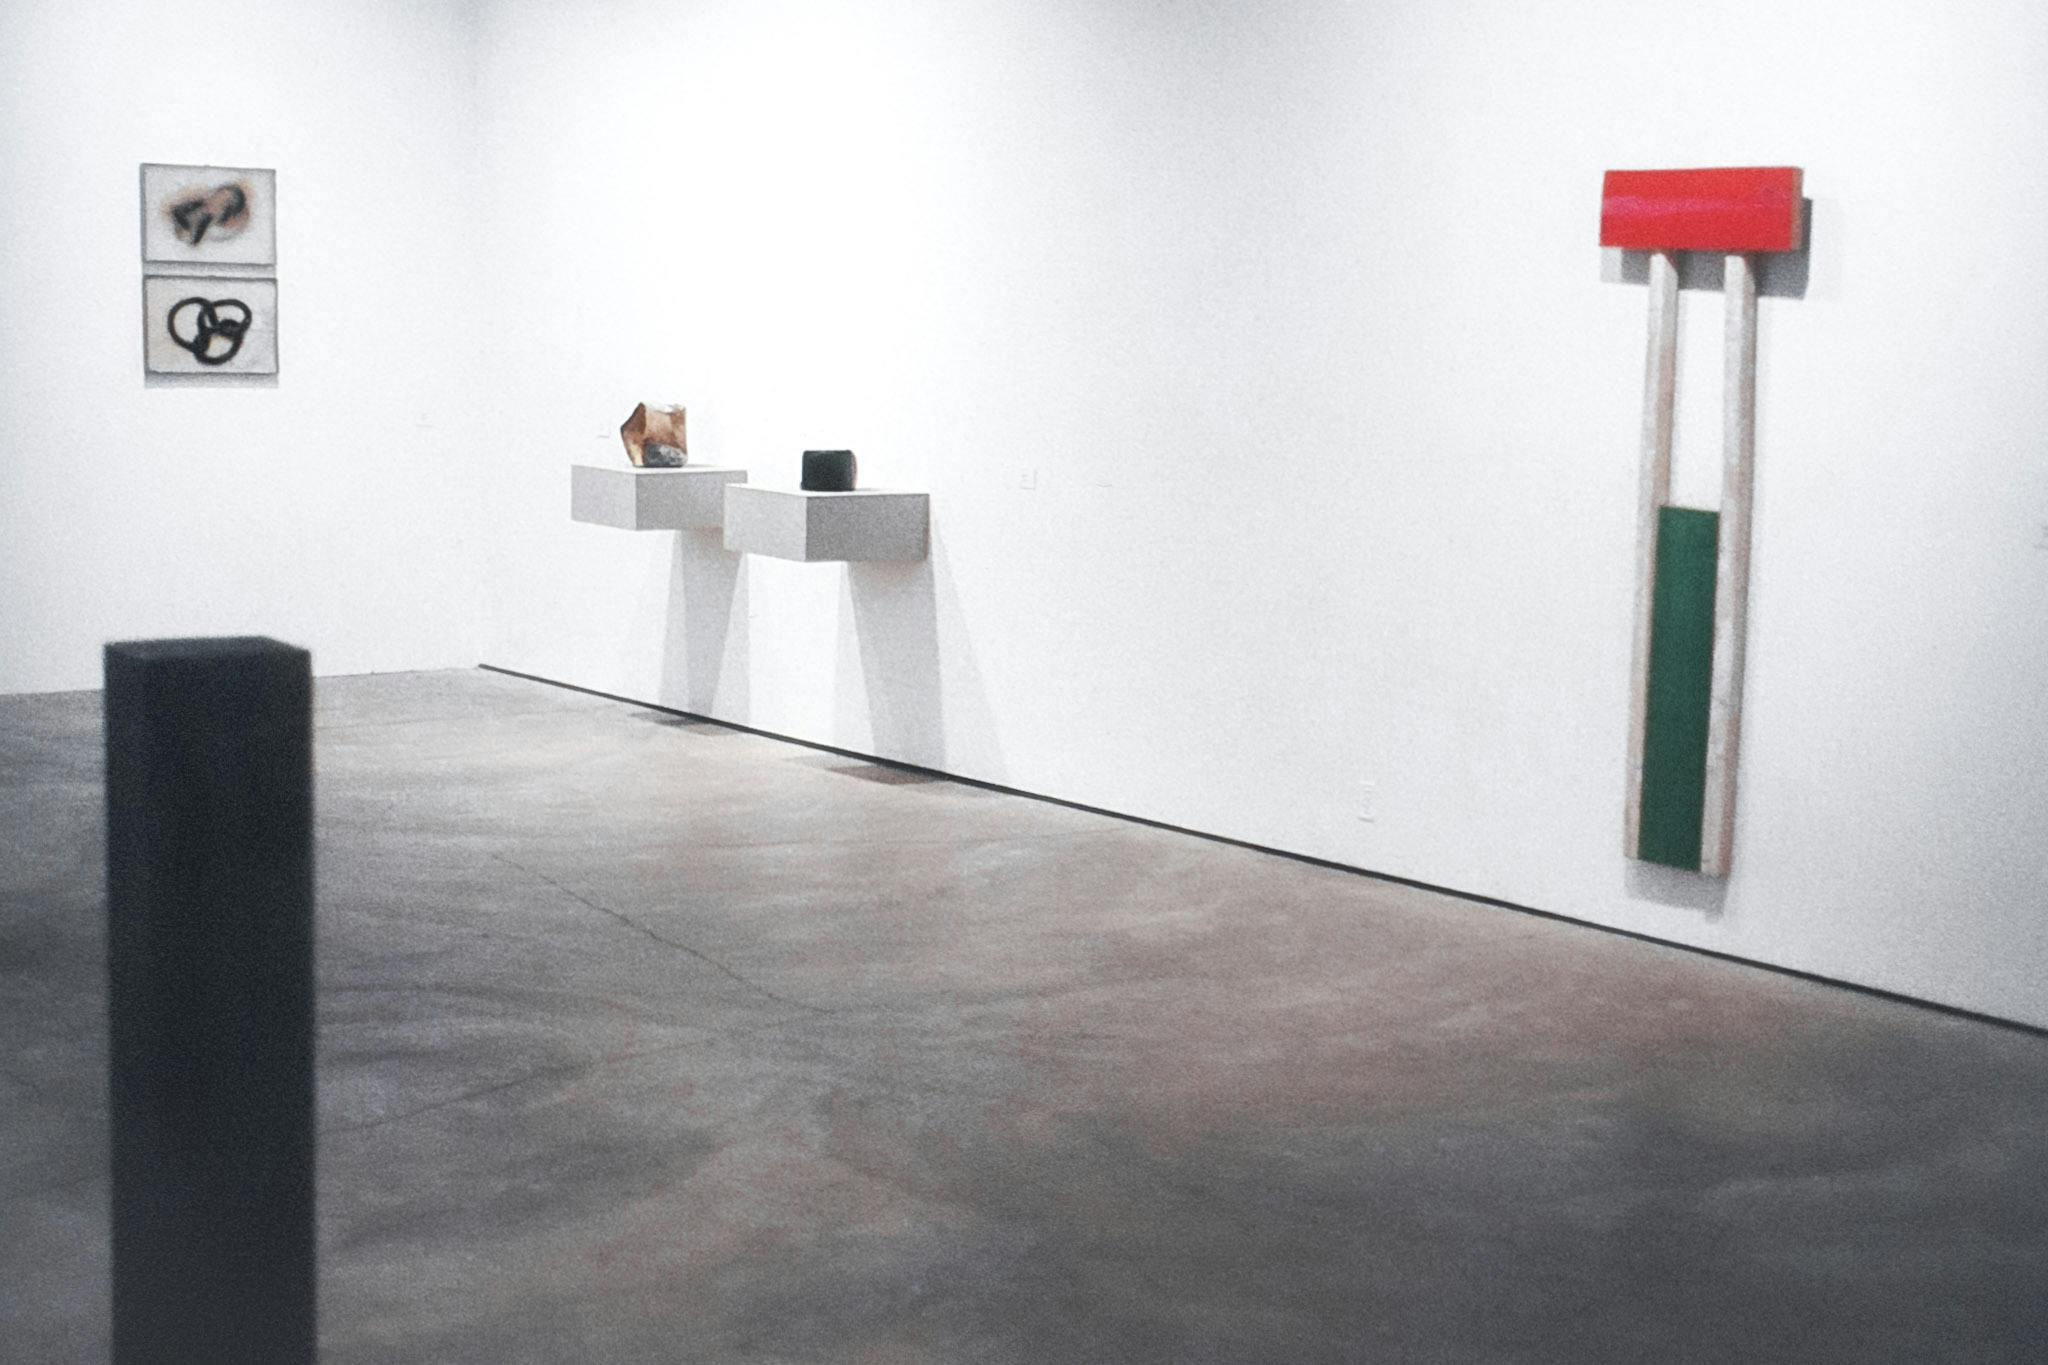 A gallery space with many artworks. Two of the works are on plinths on the wall, and 2 others are directly mounted. In the corner of the image, there is a work that is a large white rectangular prism.